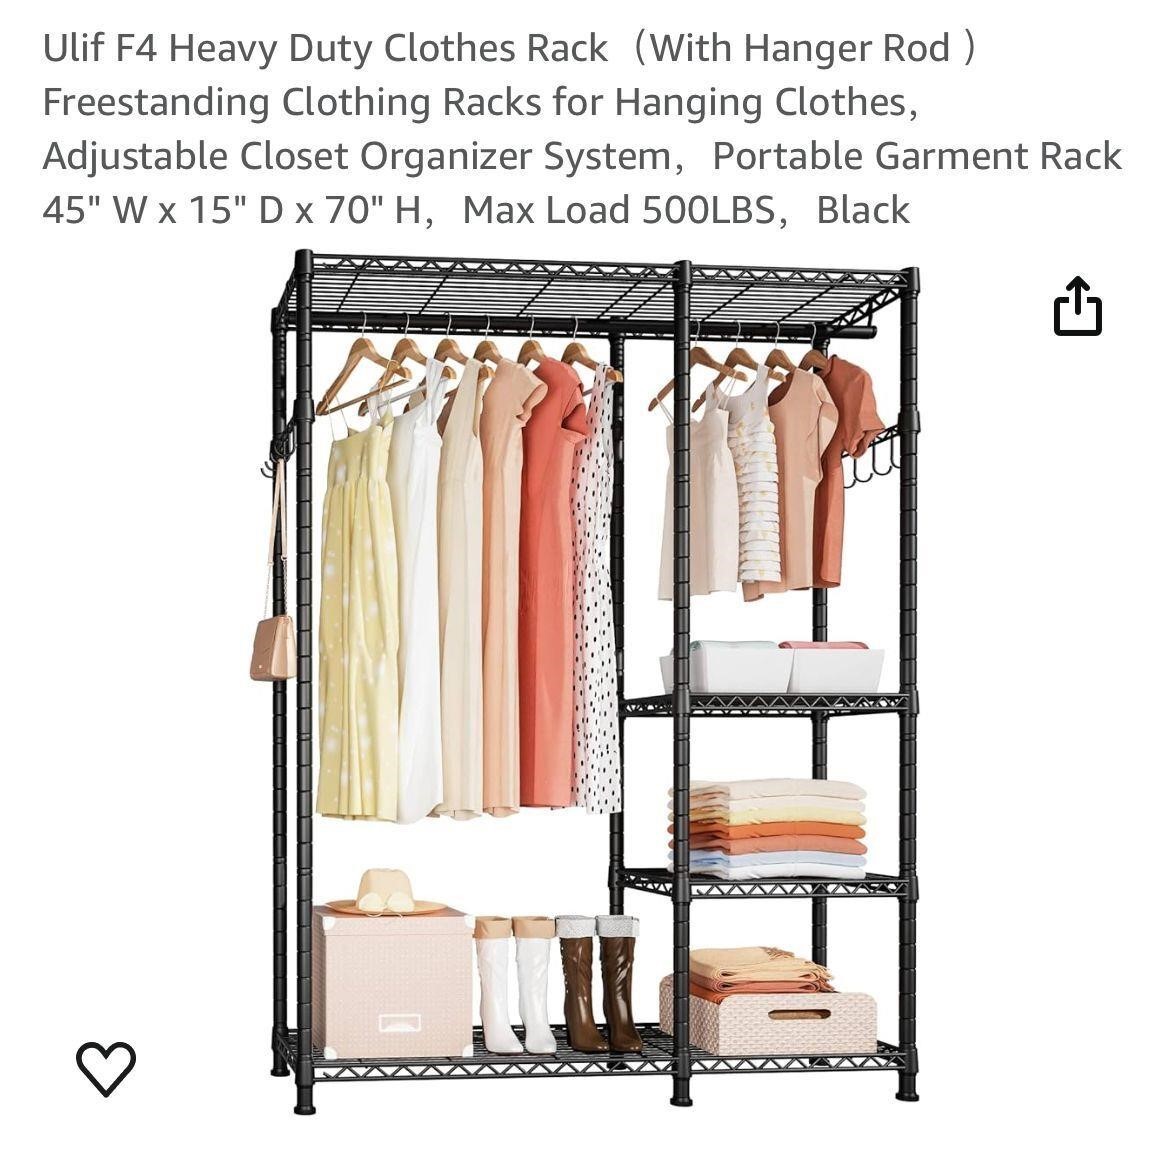 Ulif F4 Heavy Duty Clothes Rack